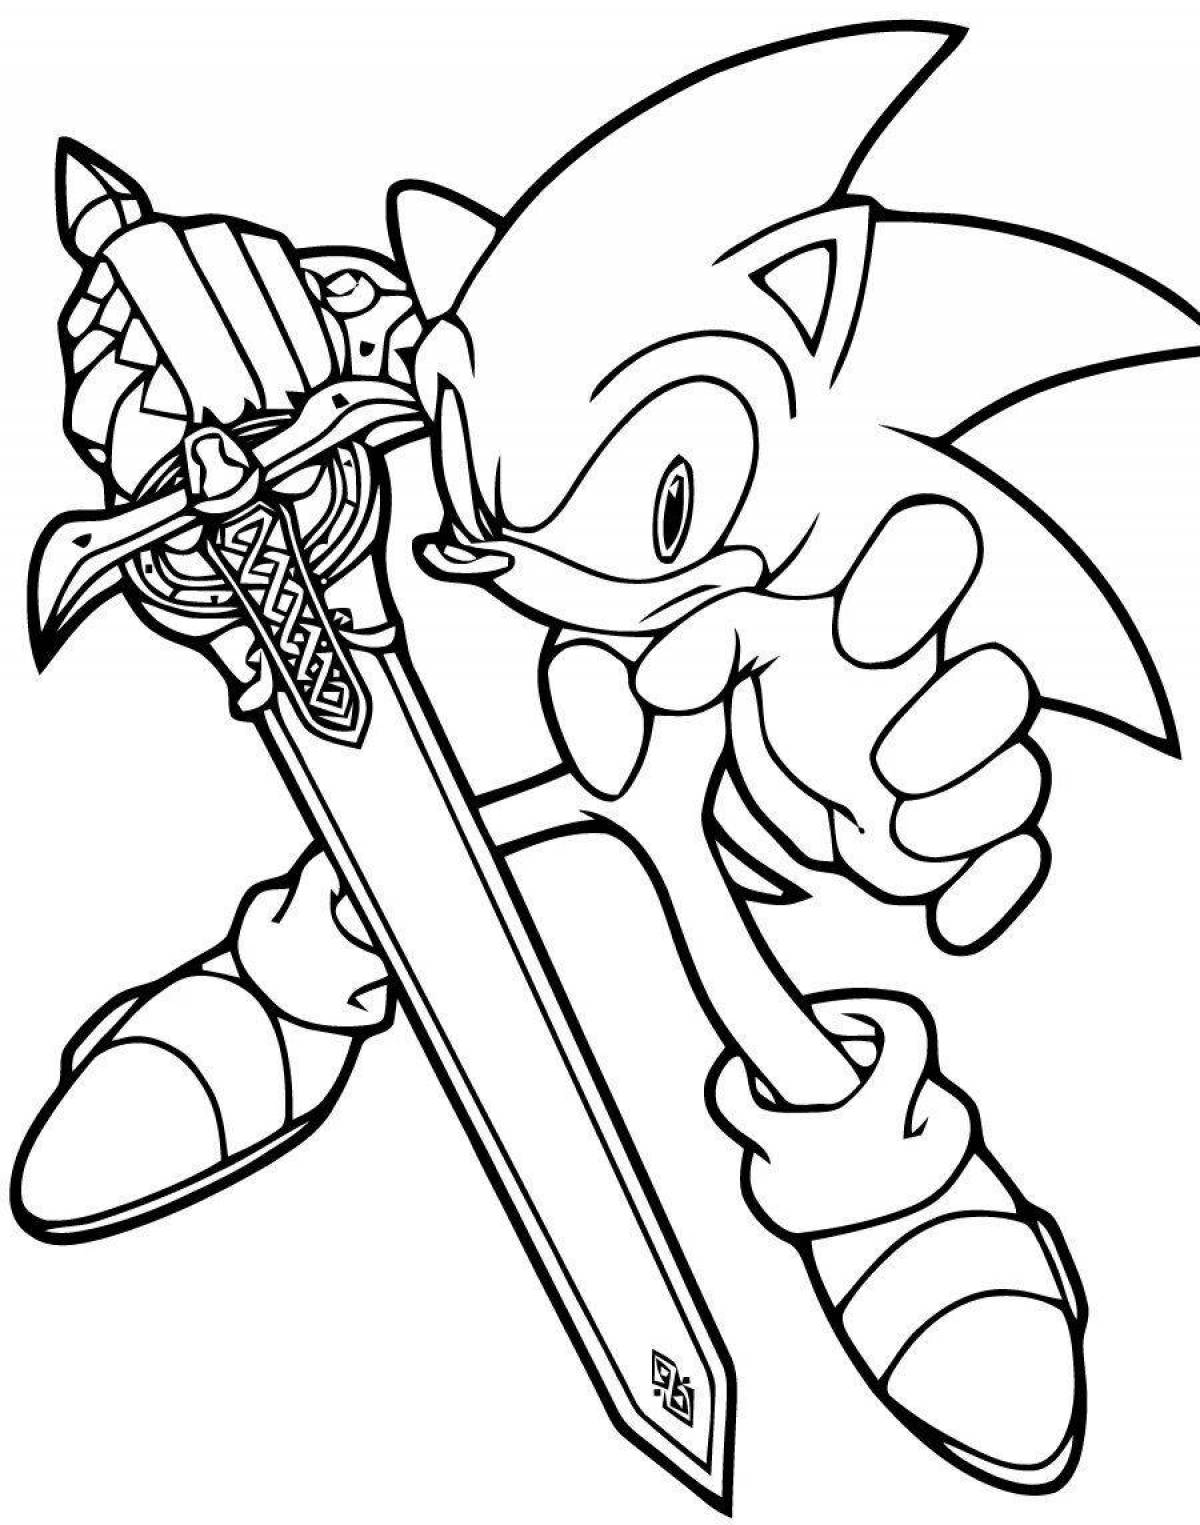 Sonic the hedgehog incredible coloring book